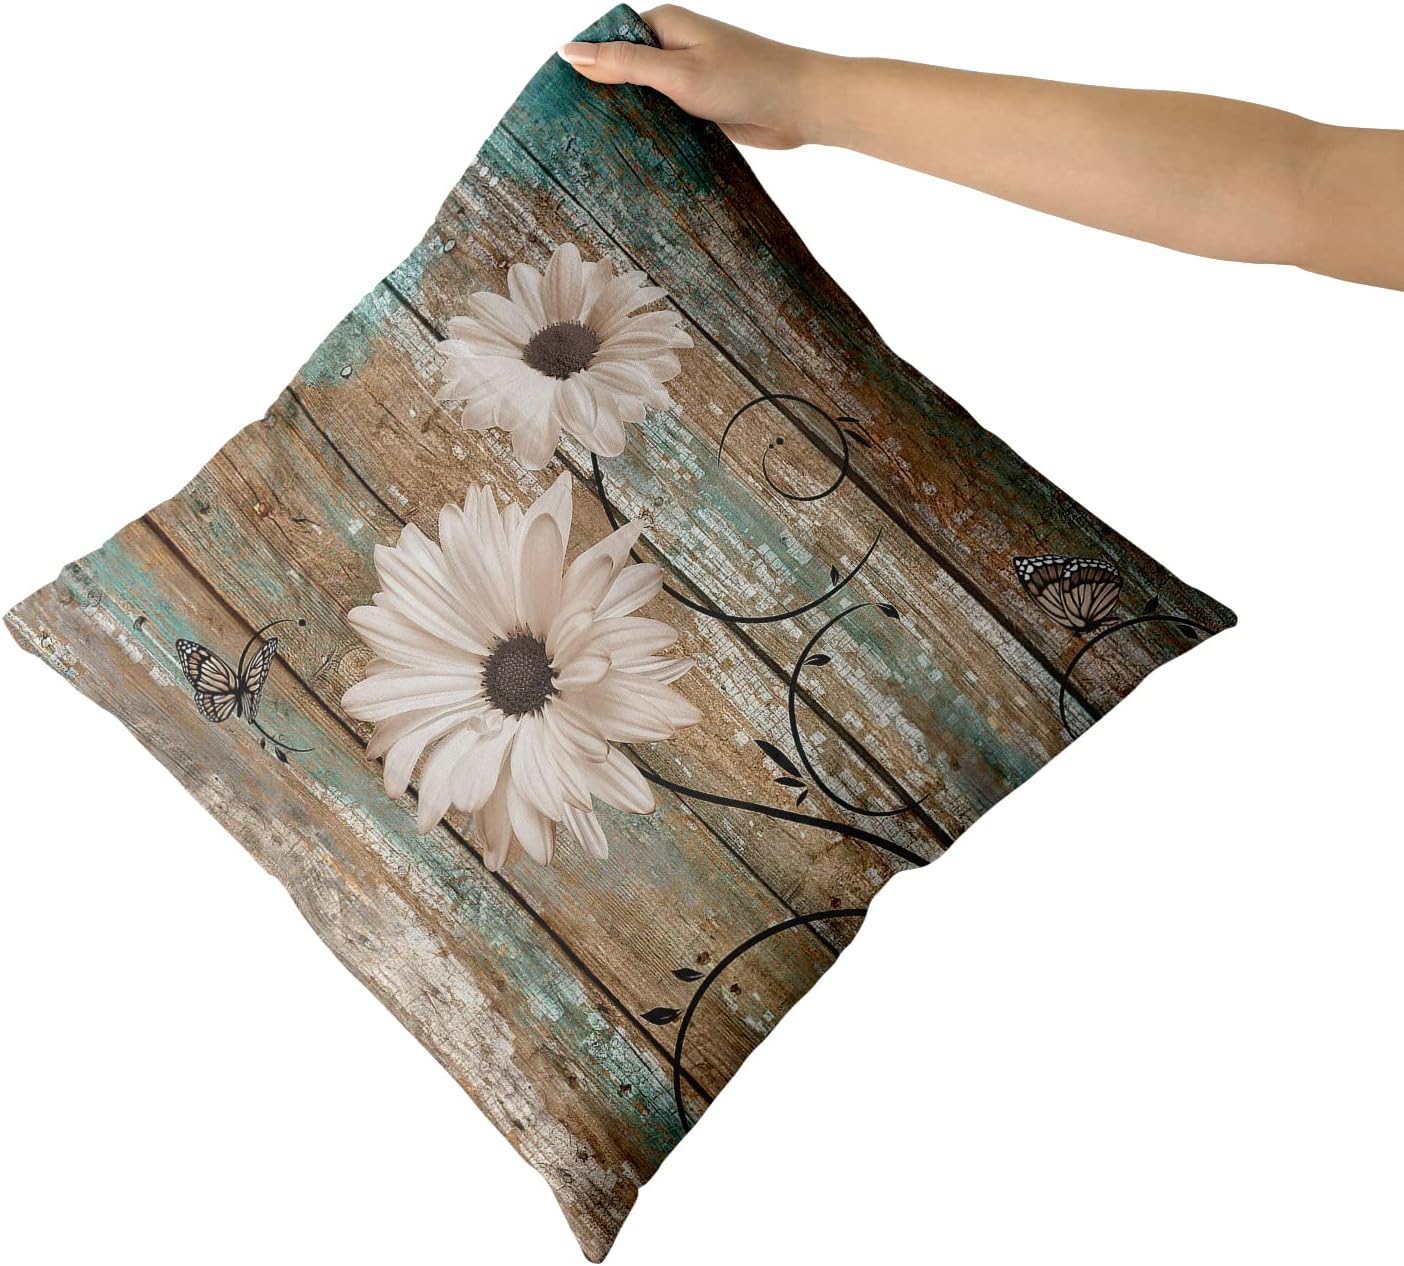 SpaceJaw 16"x16" Rustic Daisy Throw Pillow Covers, Vintage Sunflowers Wood Board Square Pillowcases, Country Farmhouse Style Floral Decorative Cushion Cover for Sofa Couch Bedding Car, Set of 2